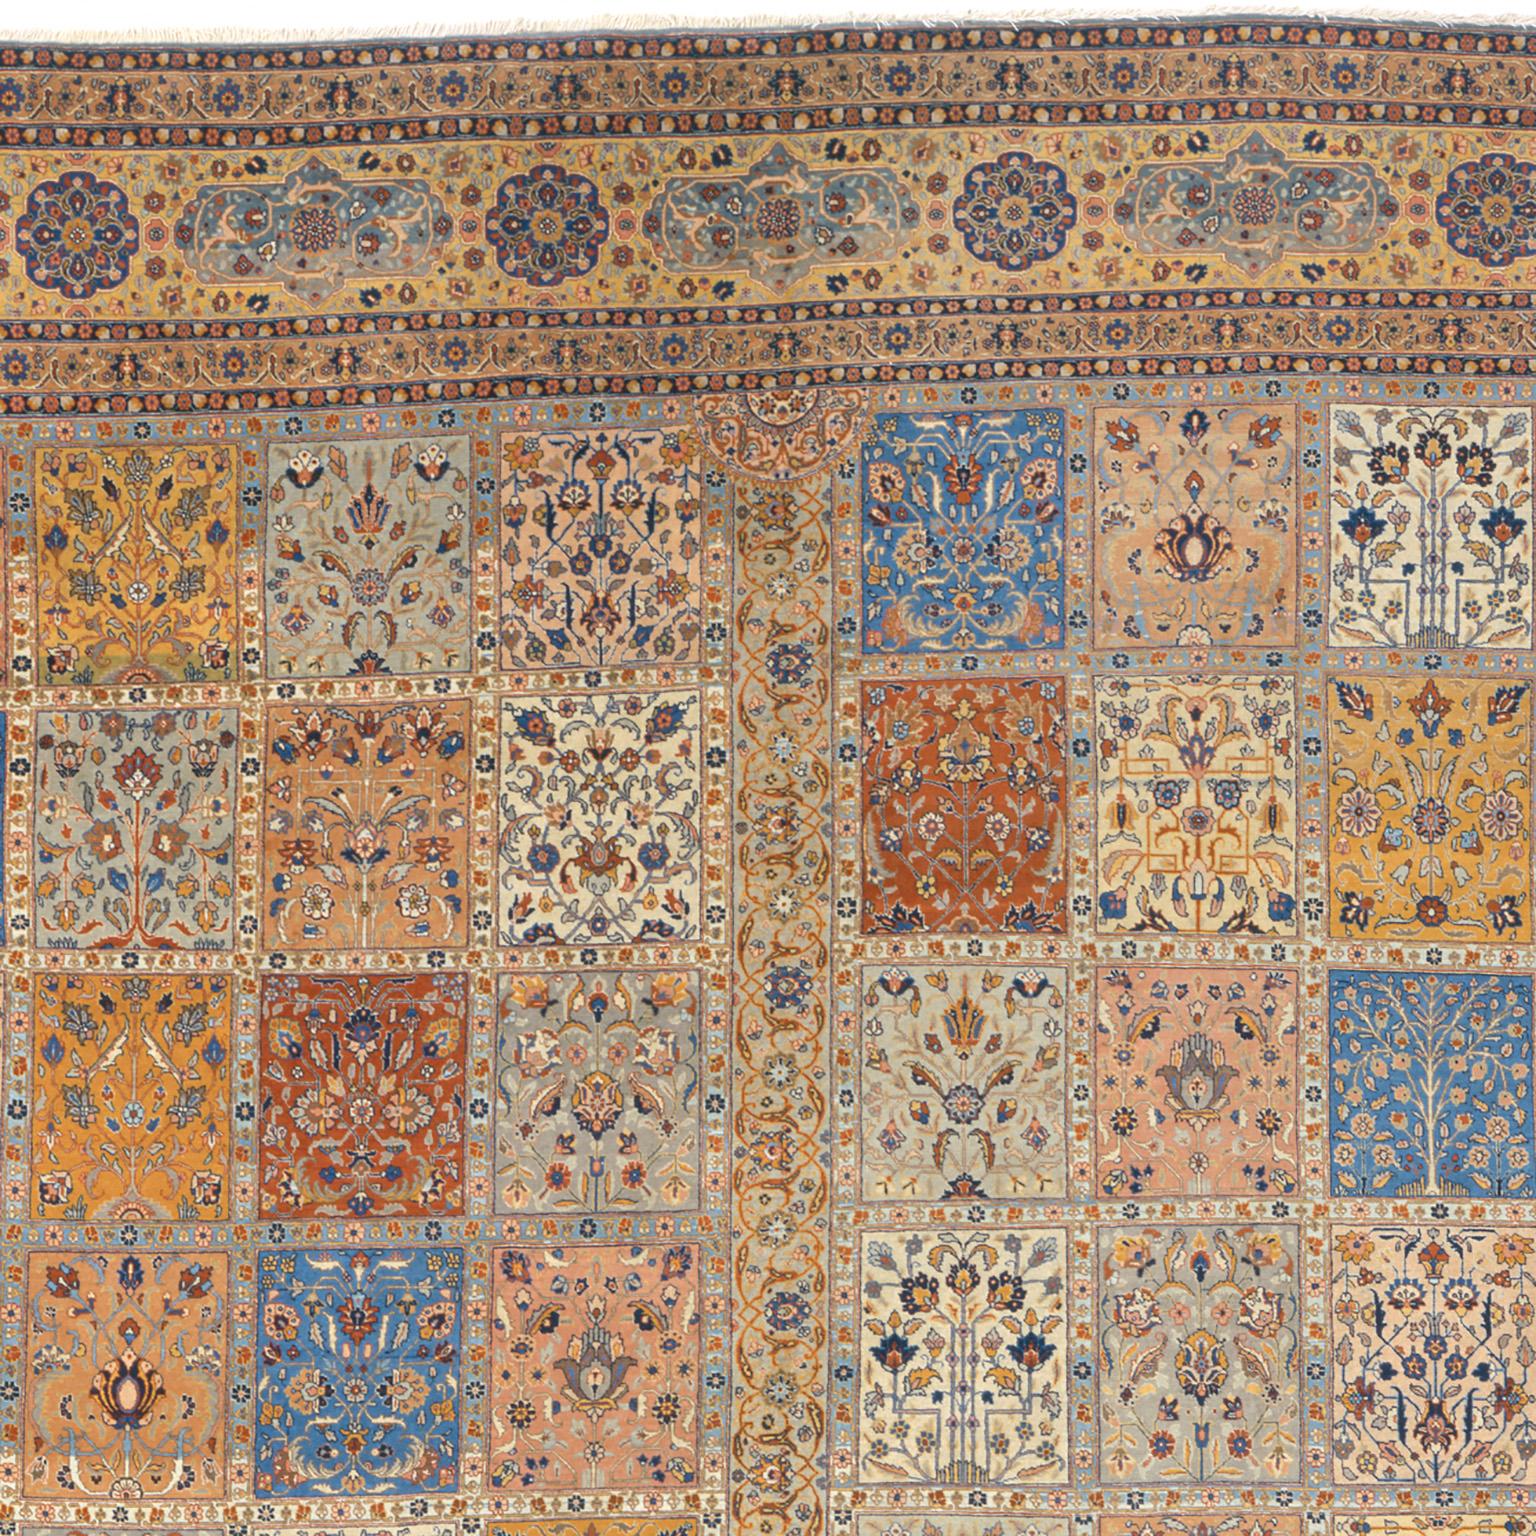 Early 20th Century Persian Tabriz Garden Design Rug In Good Condition For Sale In New York, NY